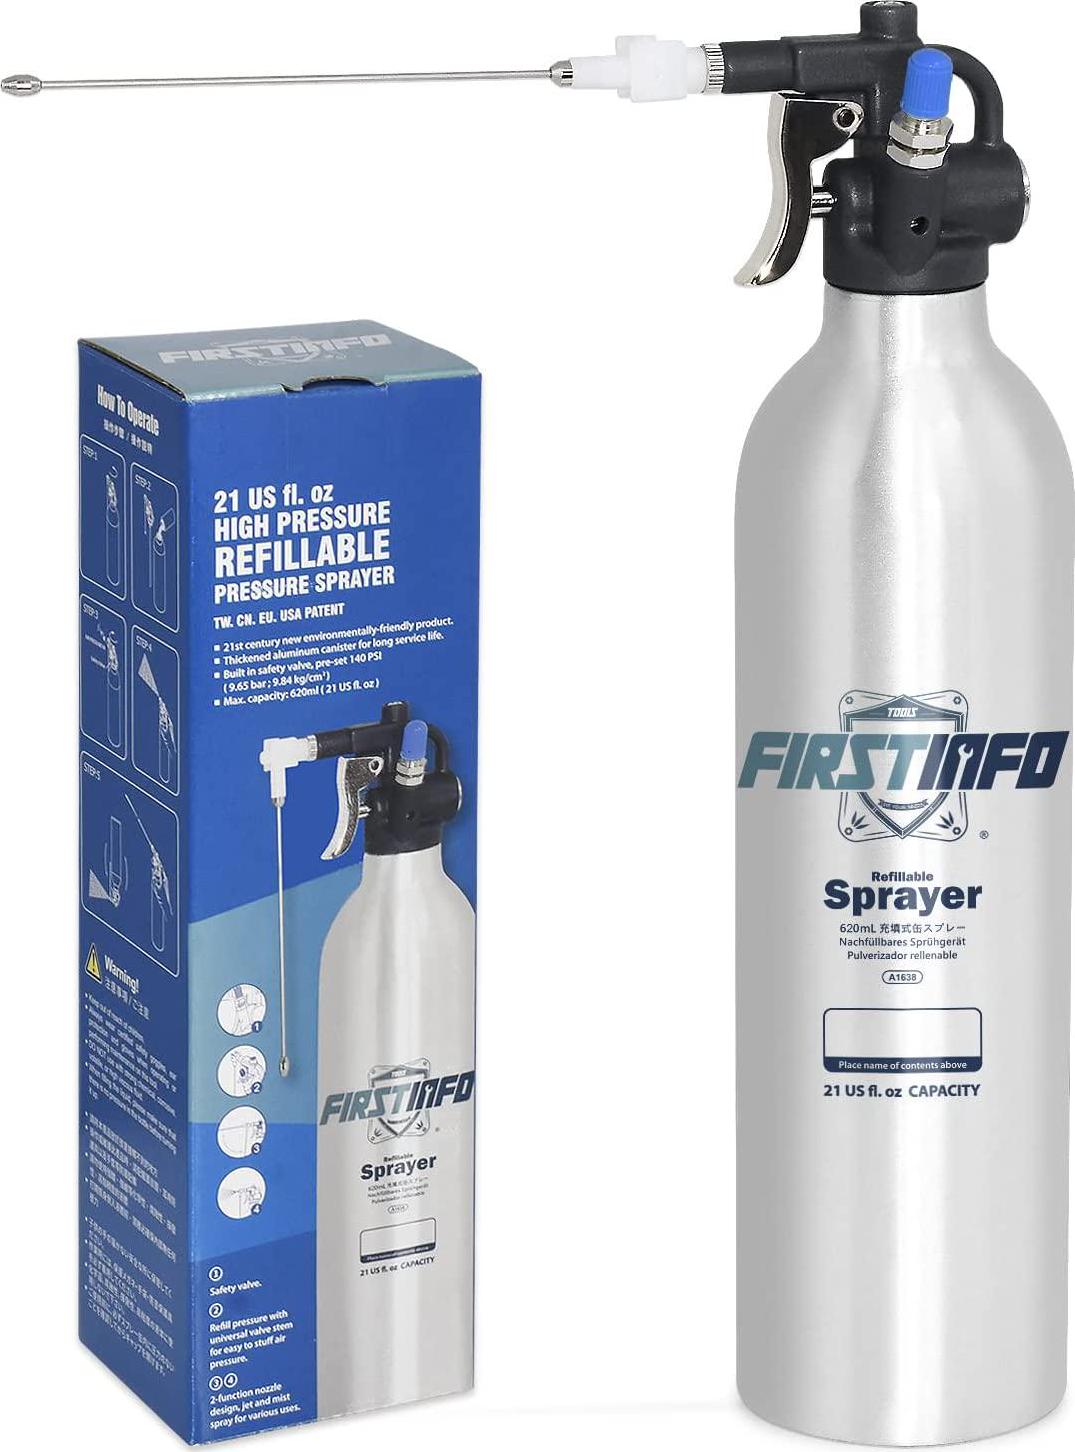 FIRSTINFO TOOLS FIT YOUR NEEDS, FIRSTINFO Patented 620c.c. (21 US fl. oz) Thickened Aluminum Canister Aerosol Refillable Fluid High Pressure Storage Sprayer/Pneumatic + Manual Pressurized/Maximum Pressure 140 psi